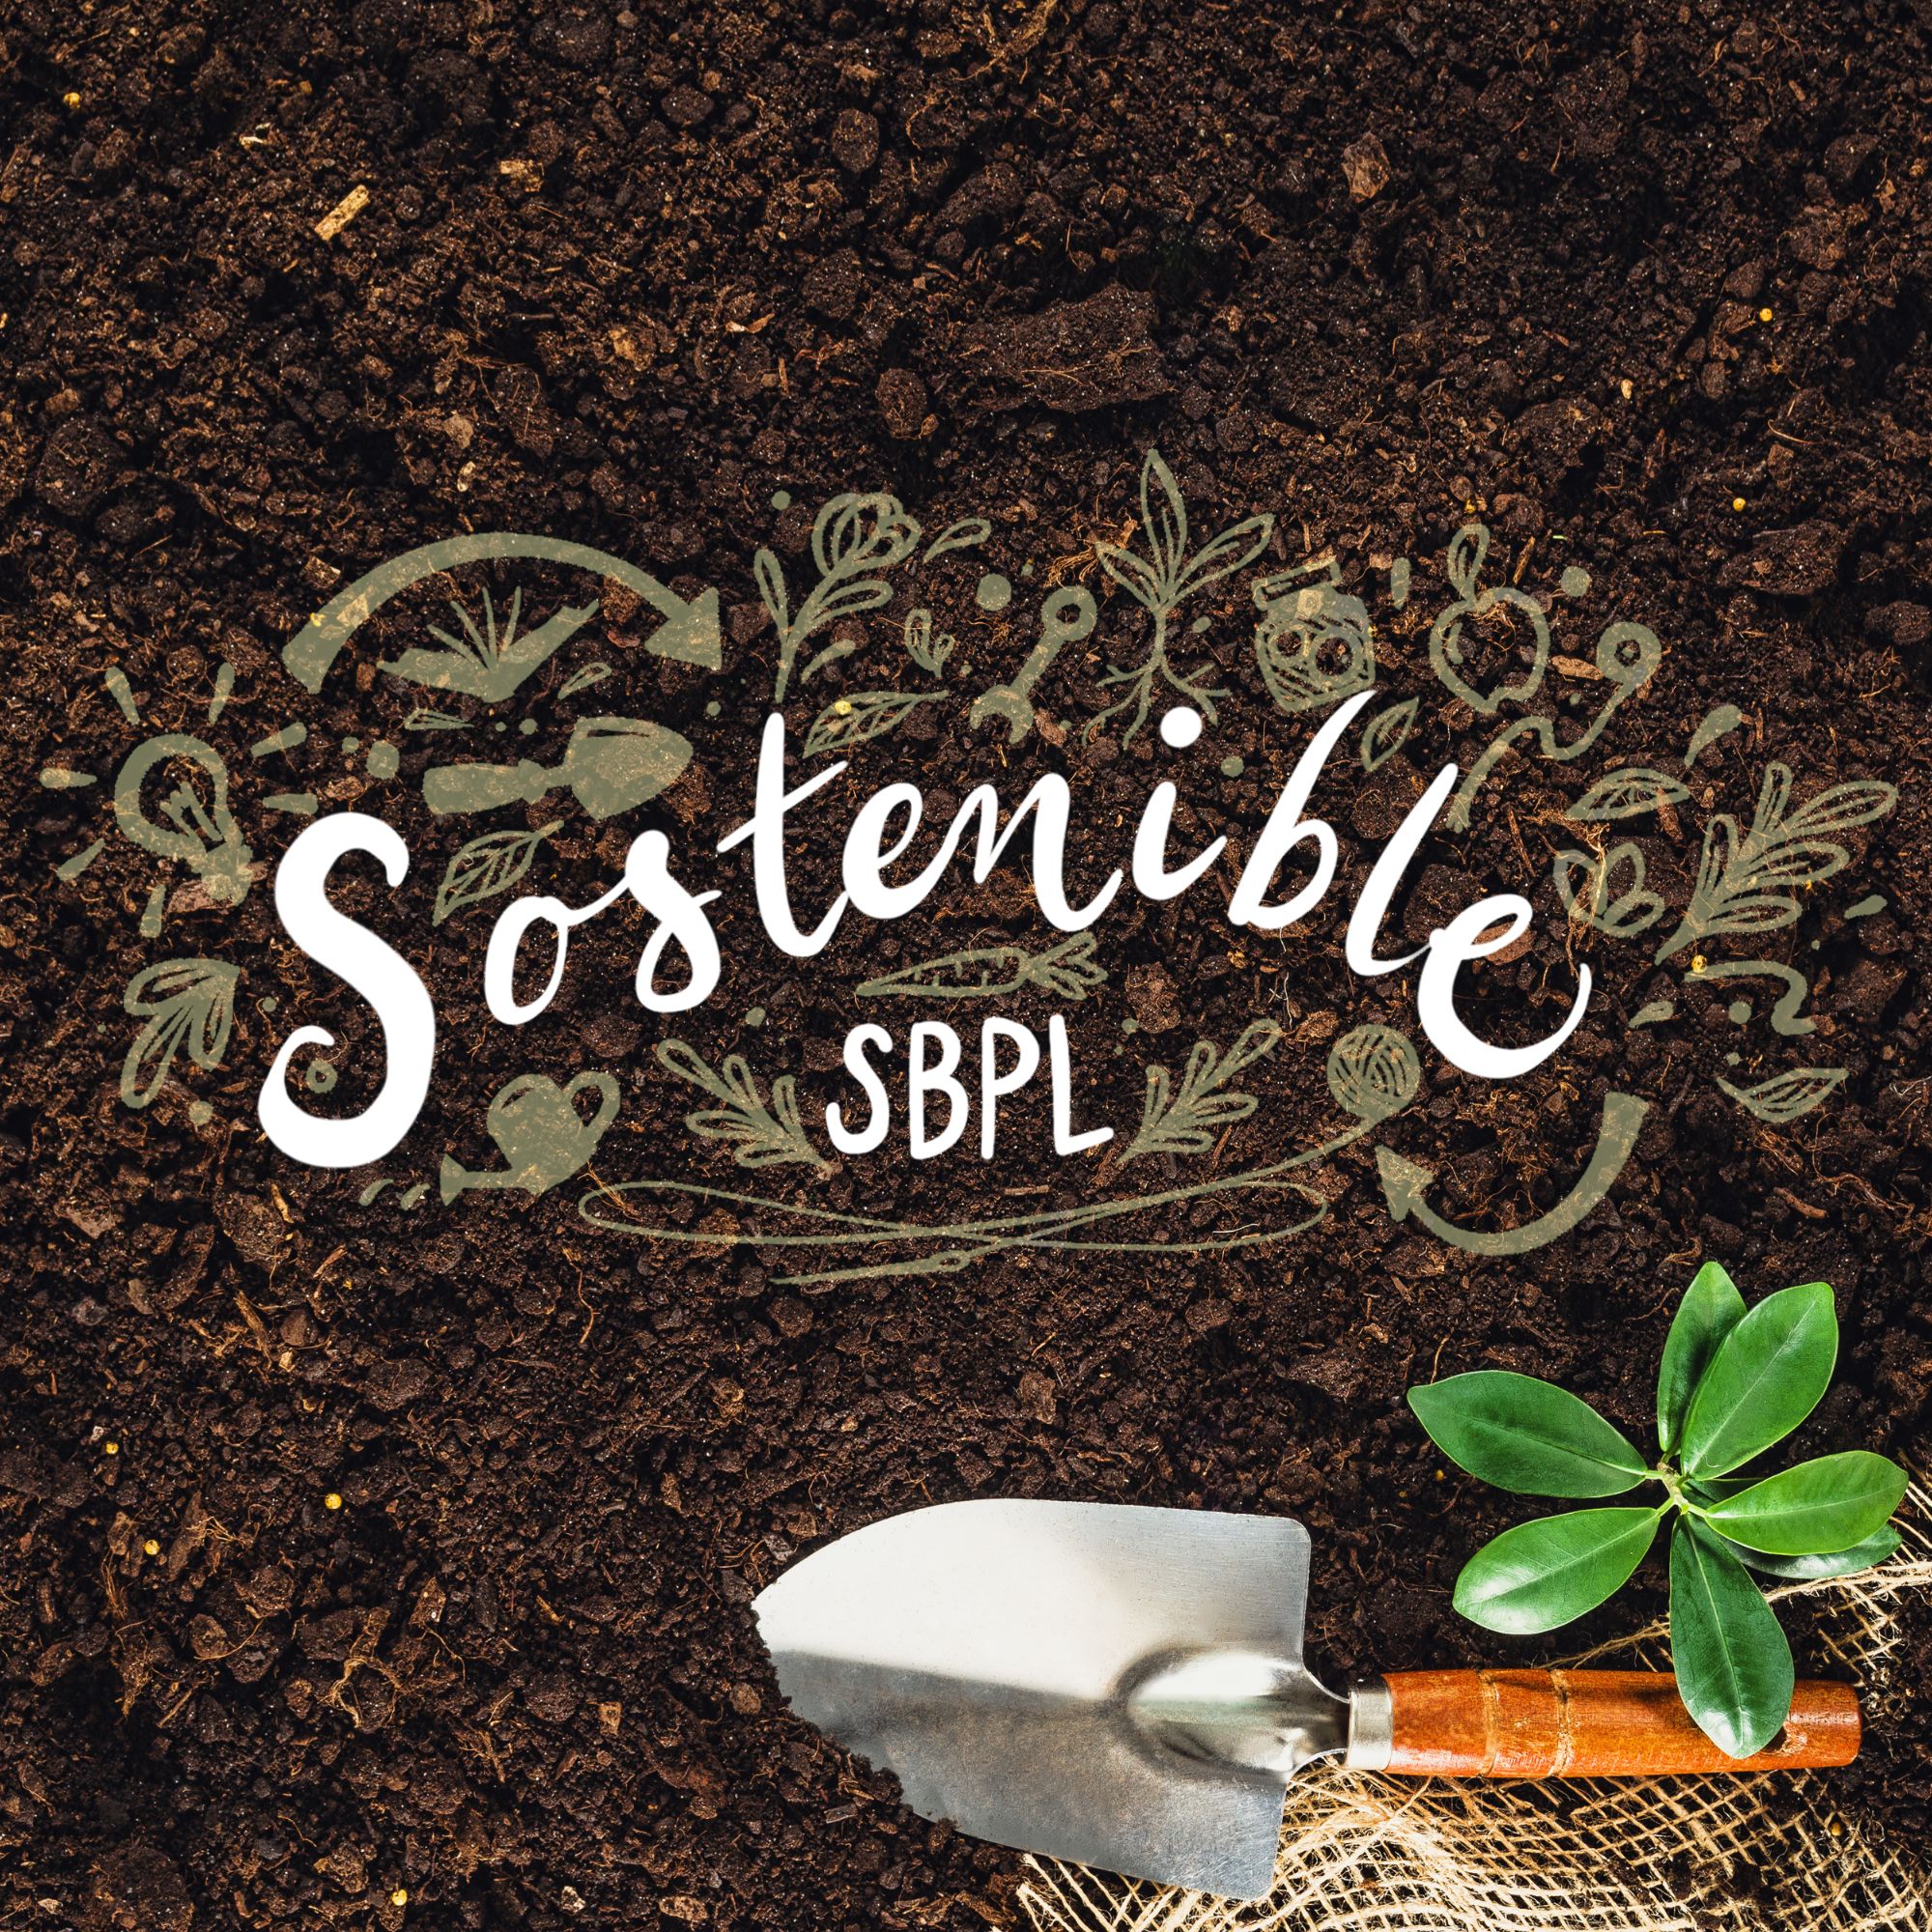 sustainable sbpl logo in dirt with tools